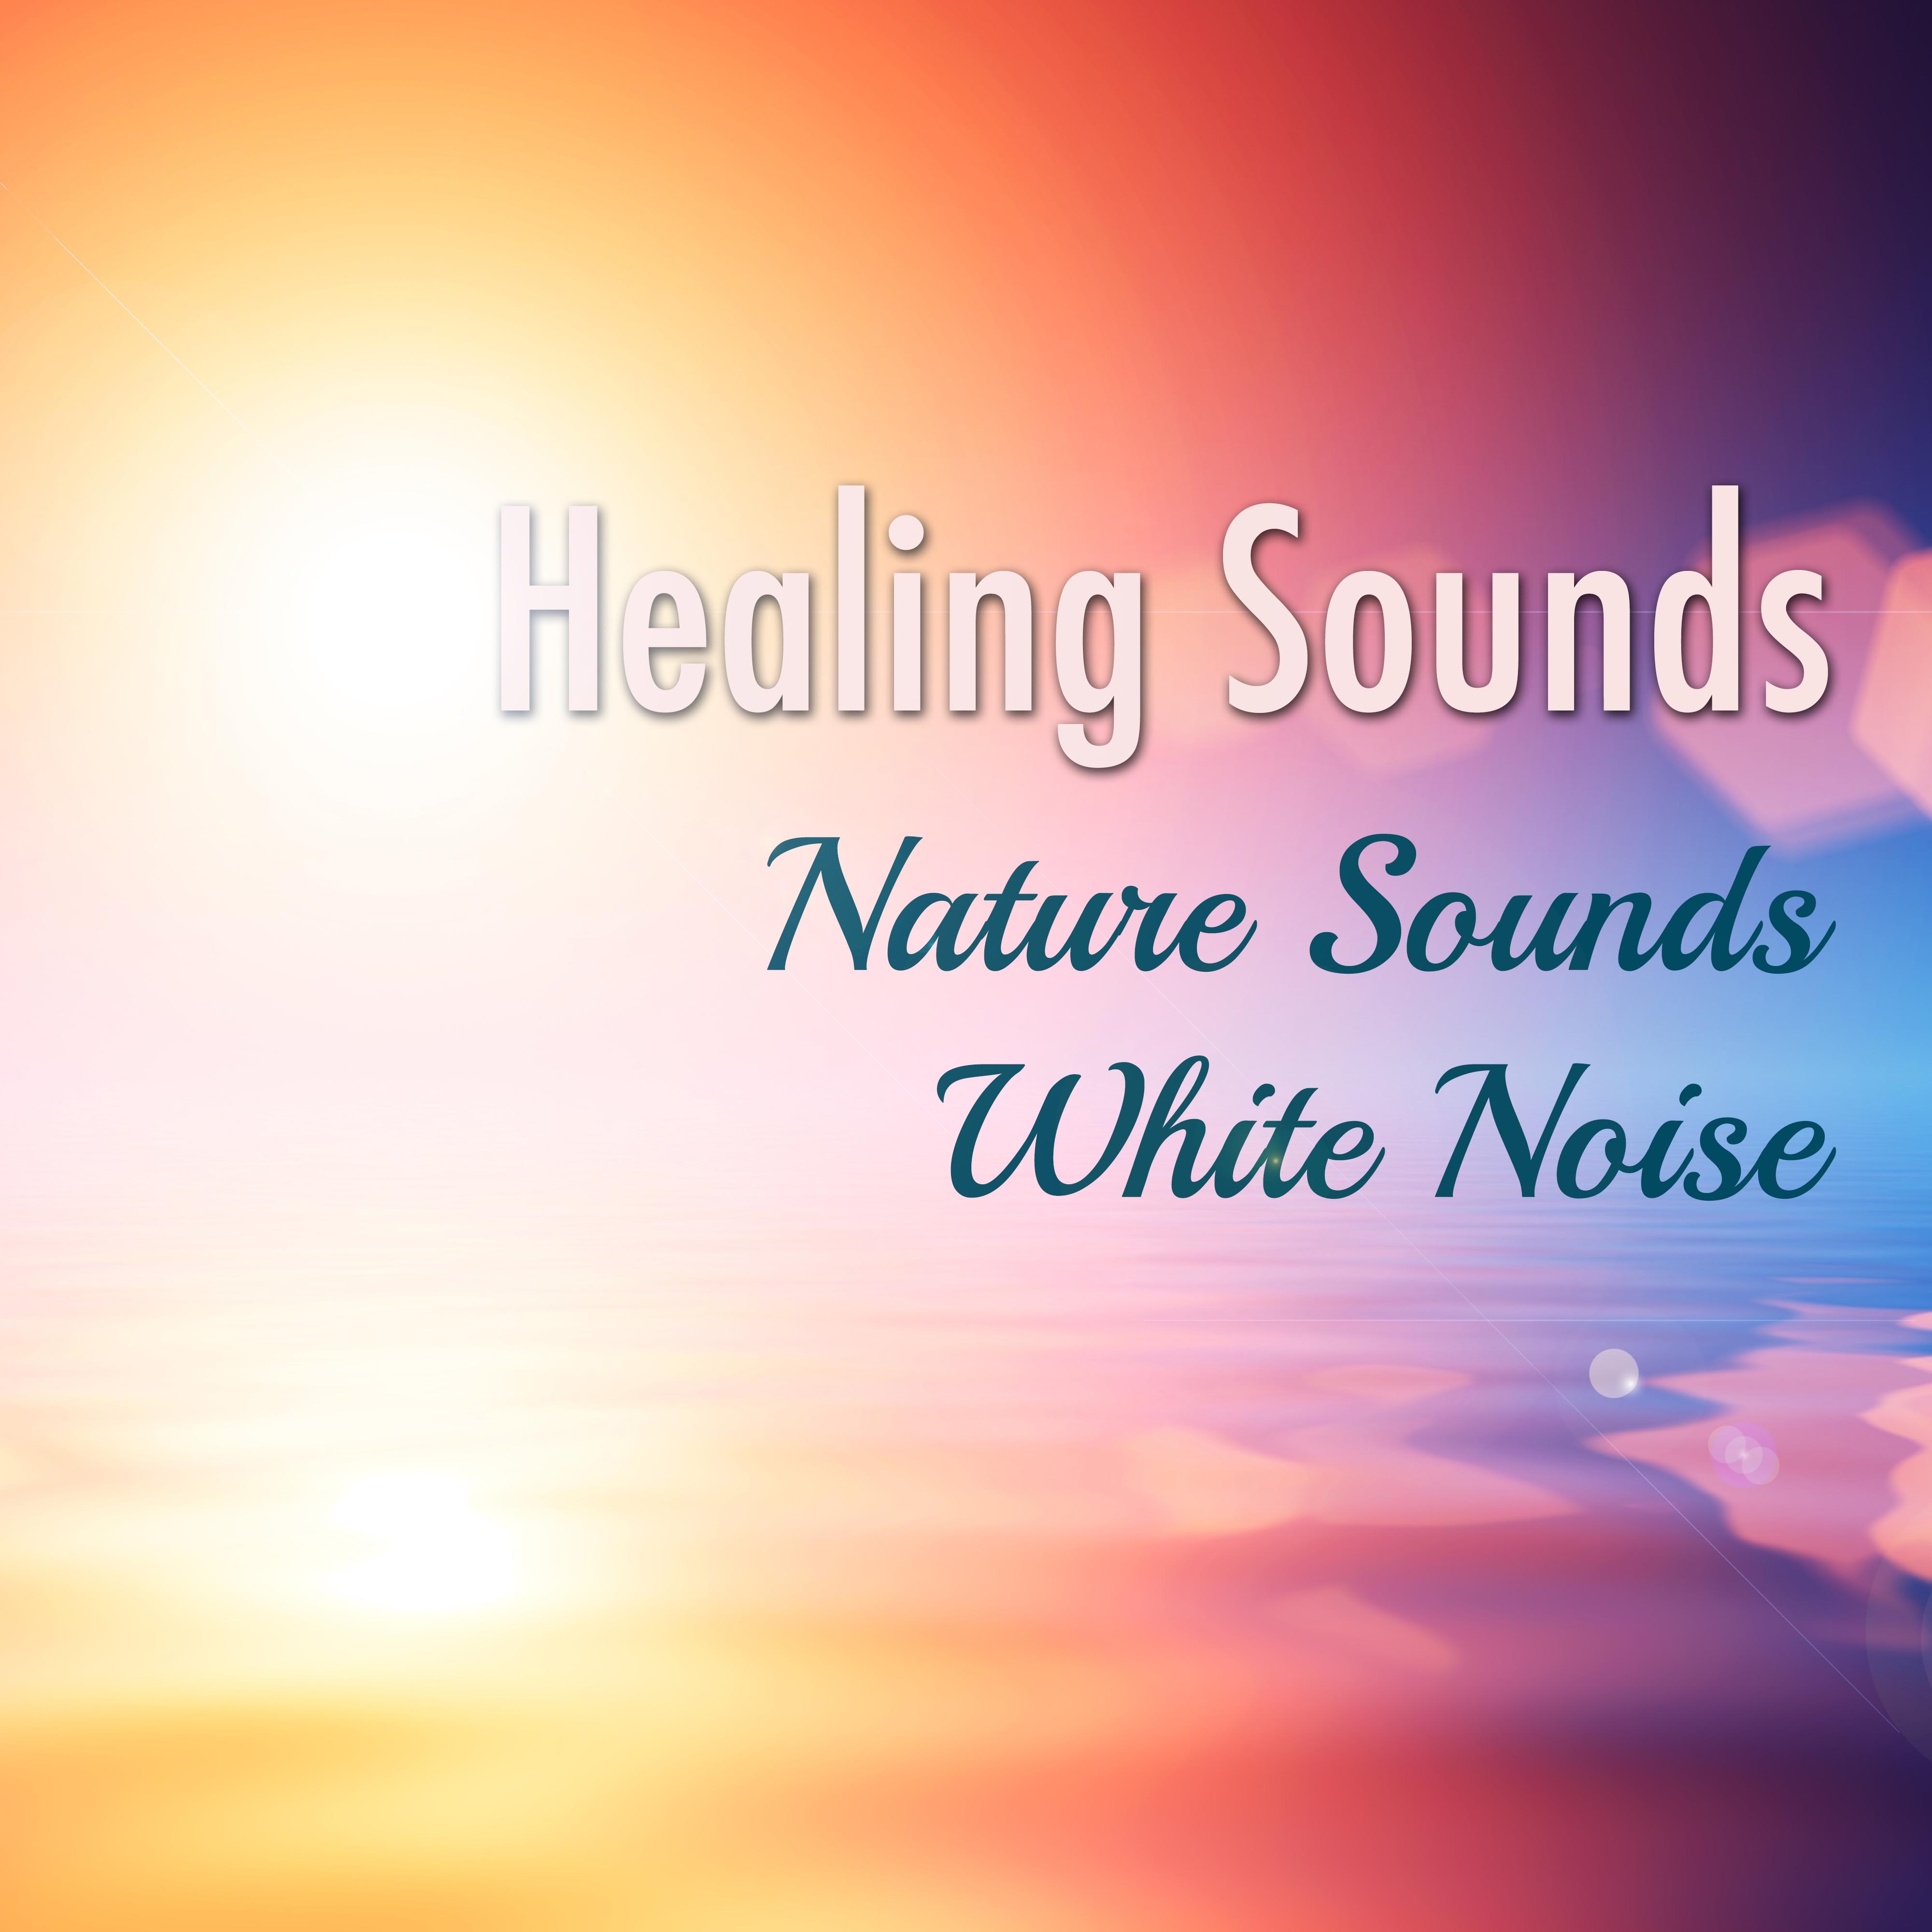 Healing Sounds: Nature Sounds and White Noise to Stimulate Positive Thoughts and Inner Peace